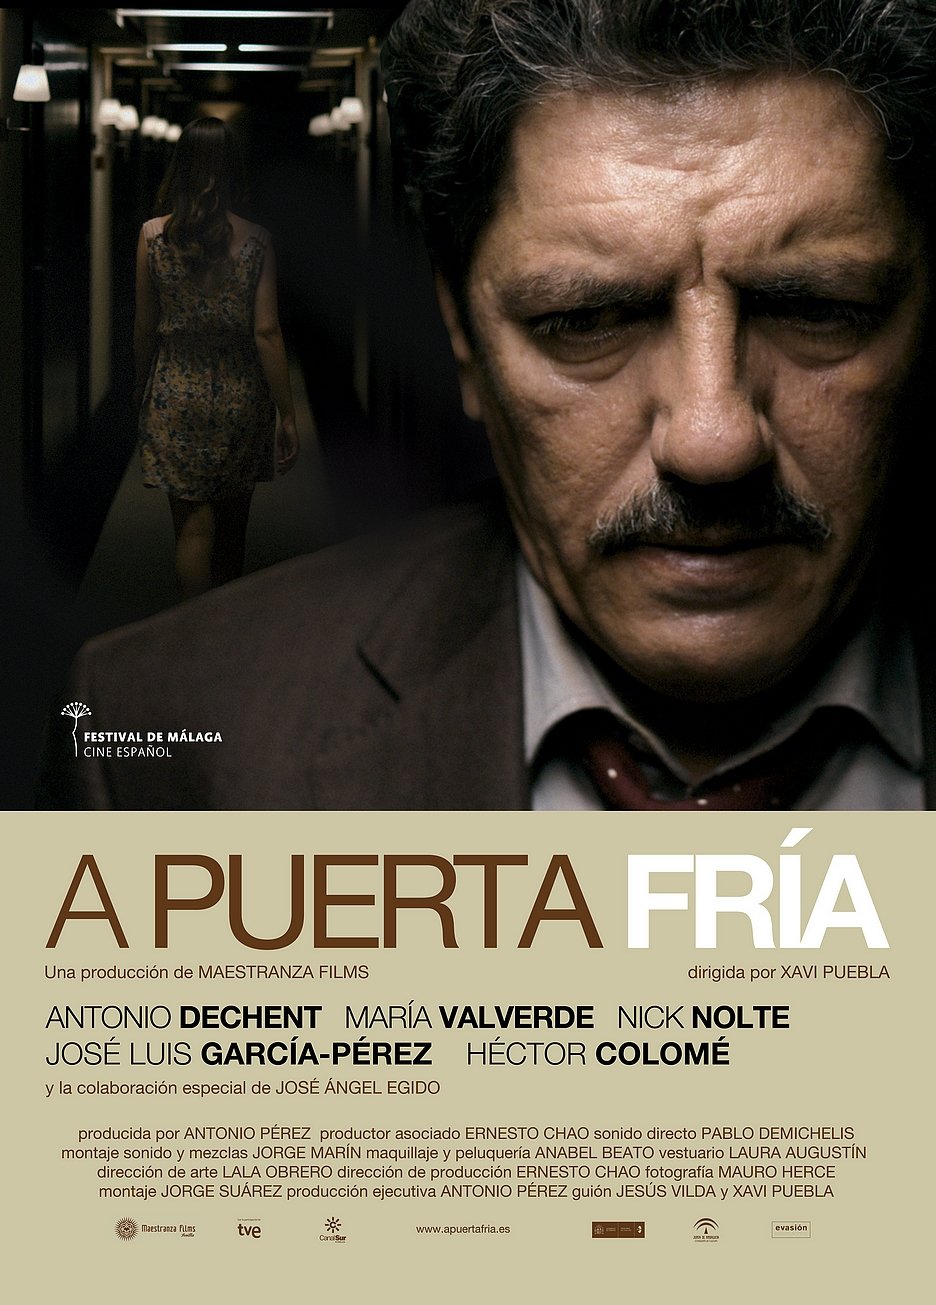 Spanish poster of the movie A puerta fría